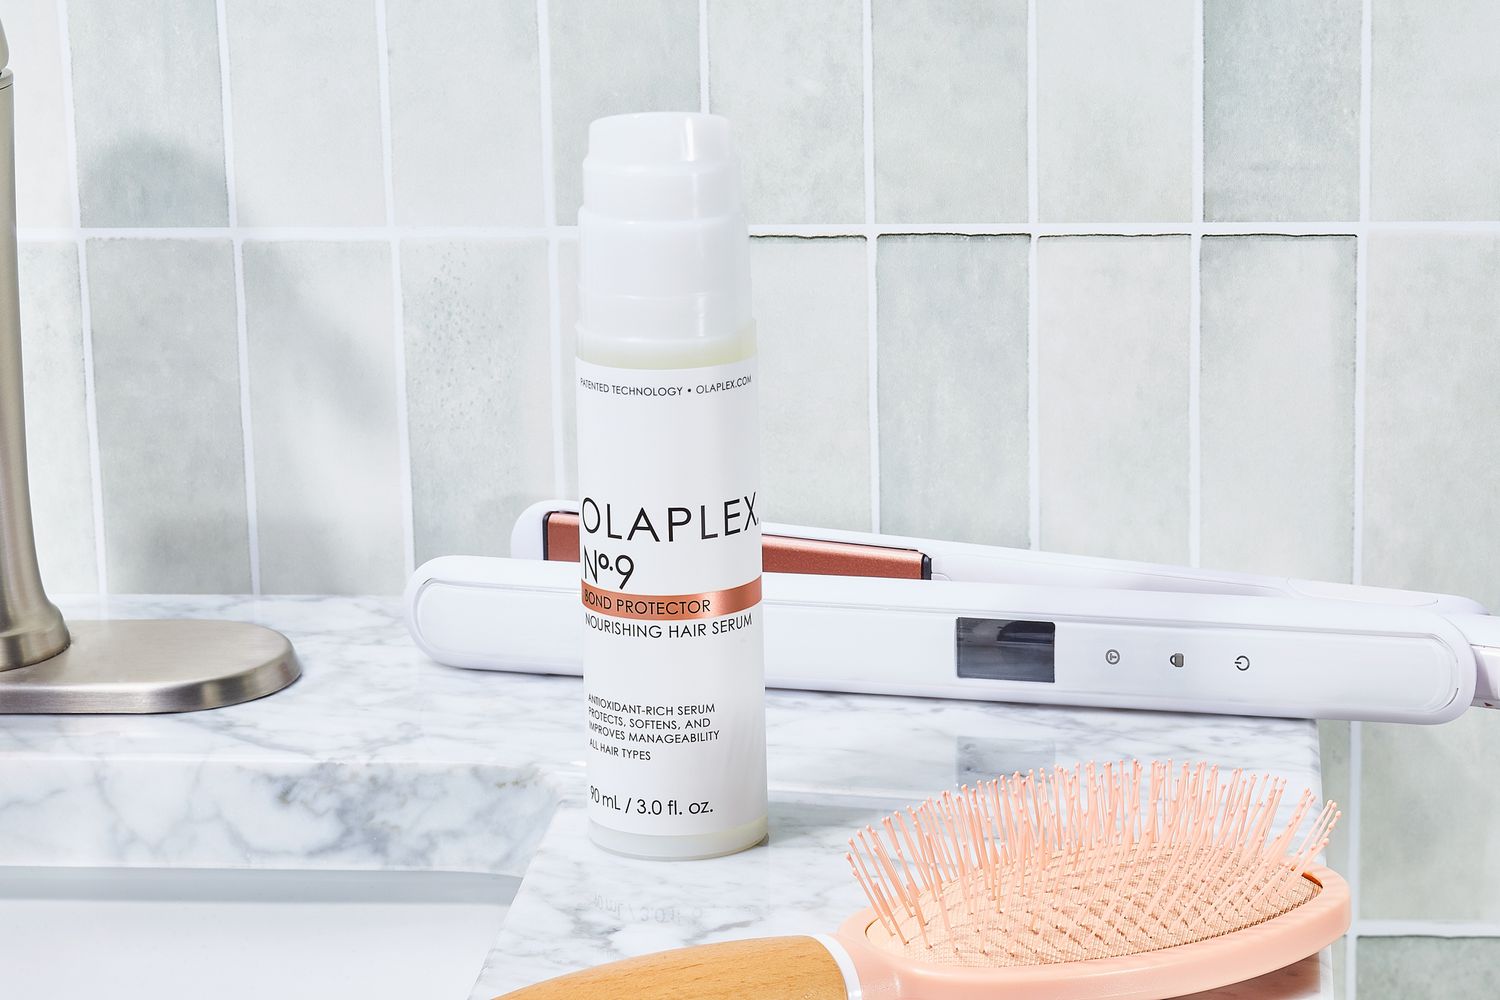 Olaplex No. 9 Bond Protector Nourishing Hair Serum bottle sits on bathroom counter with hair styling tools